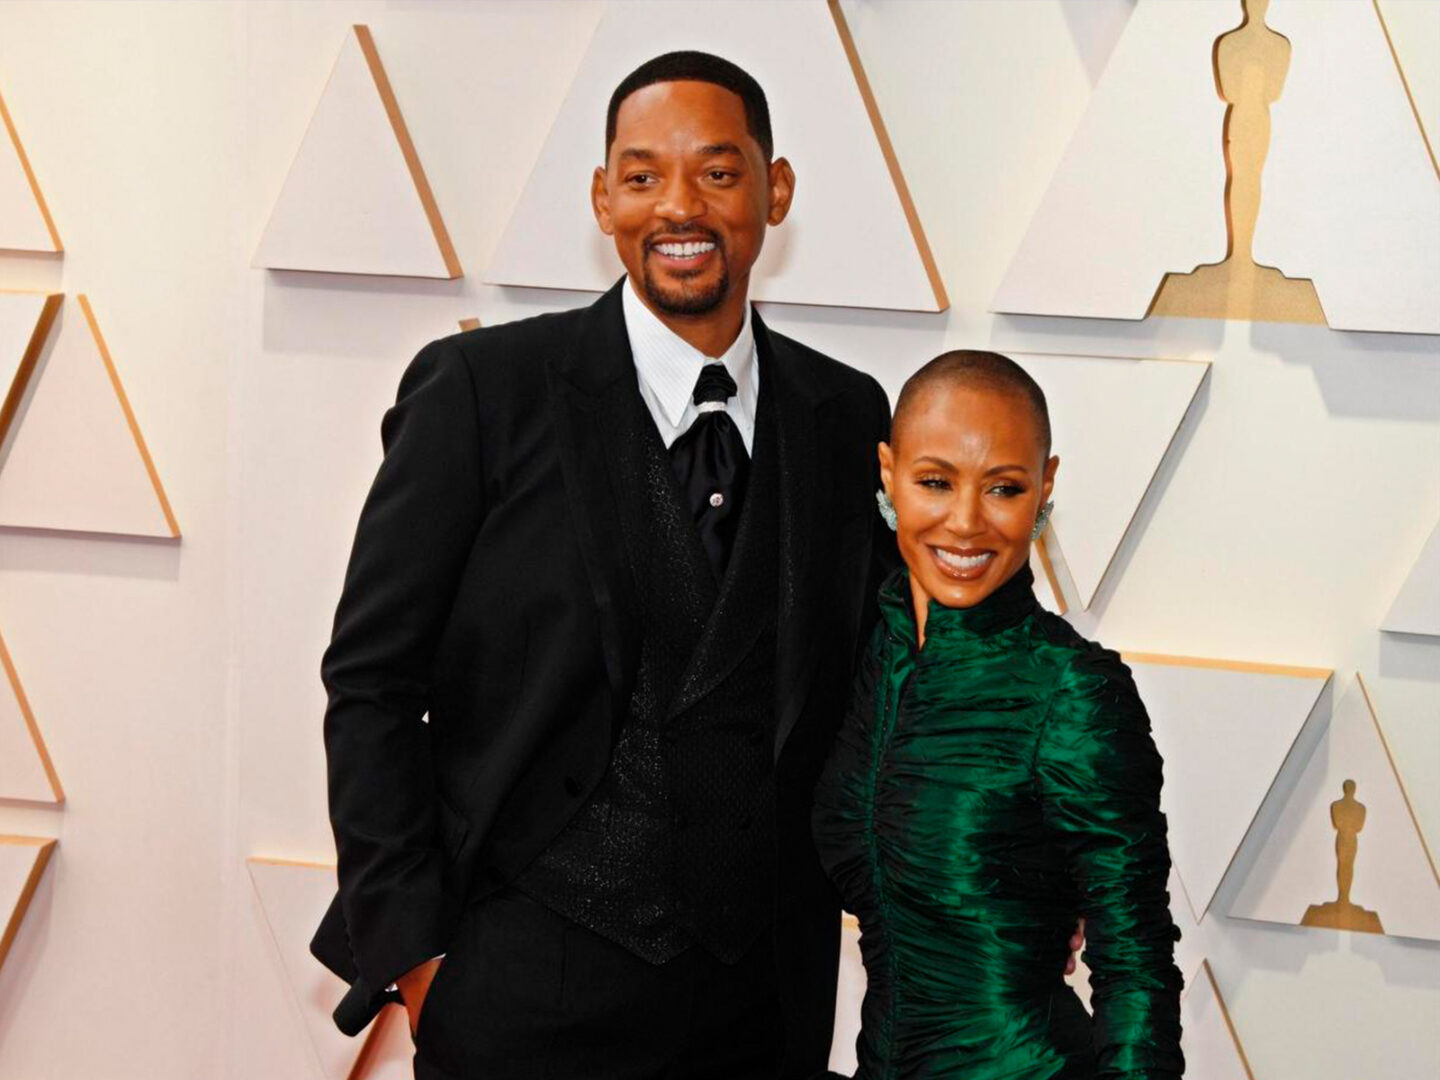 Jada Pinkett Smith reveals she has been separated from Will Smith for 7 years